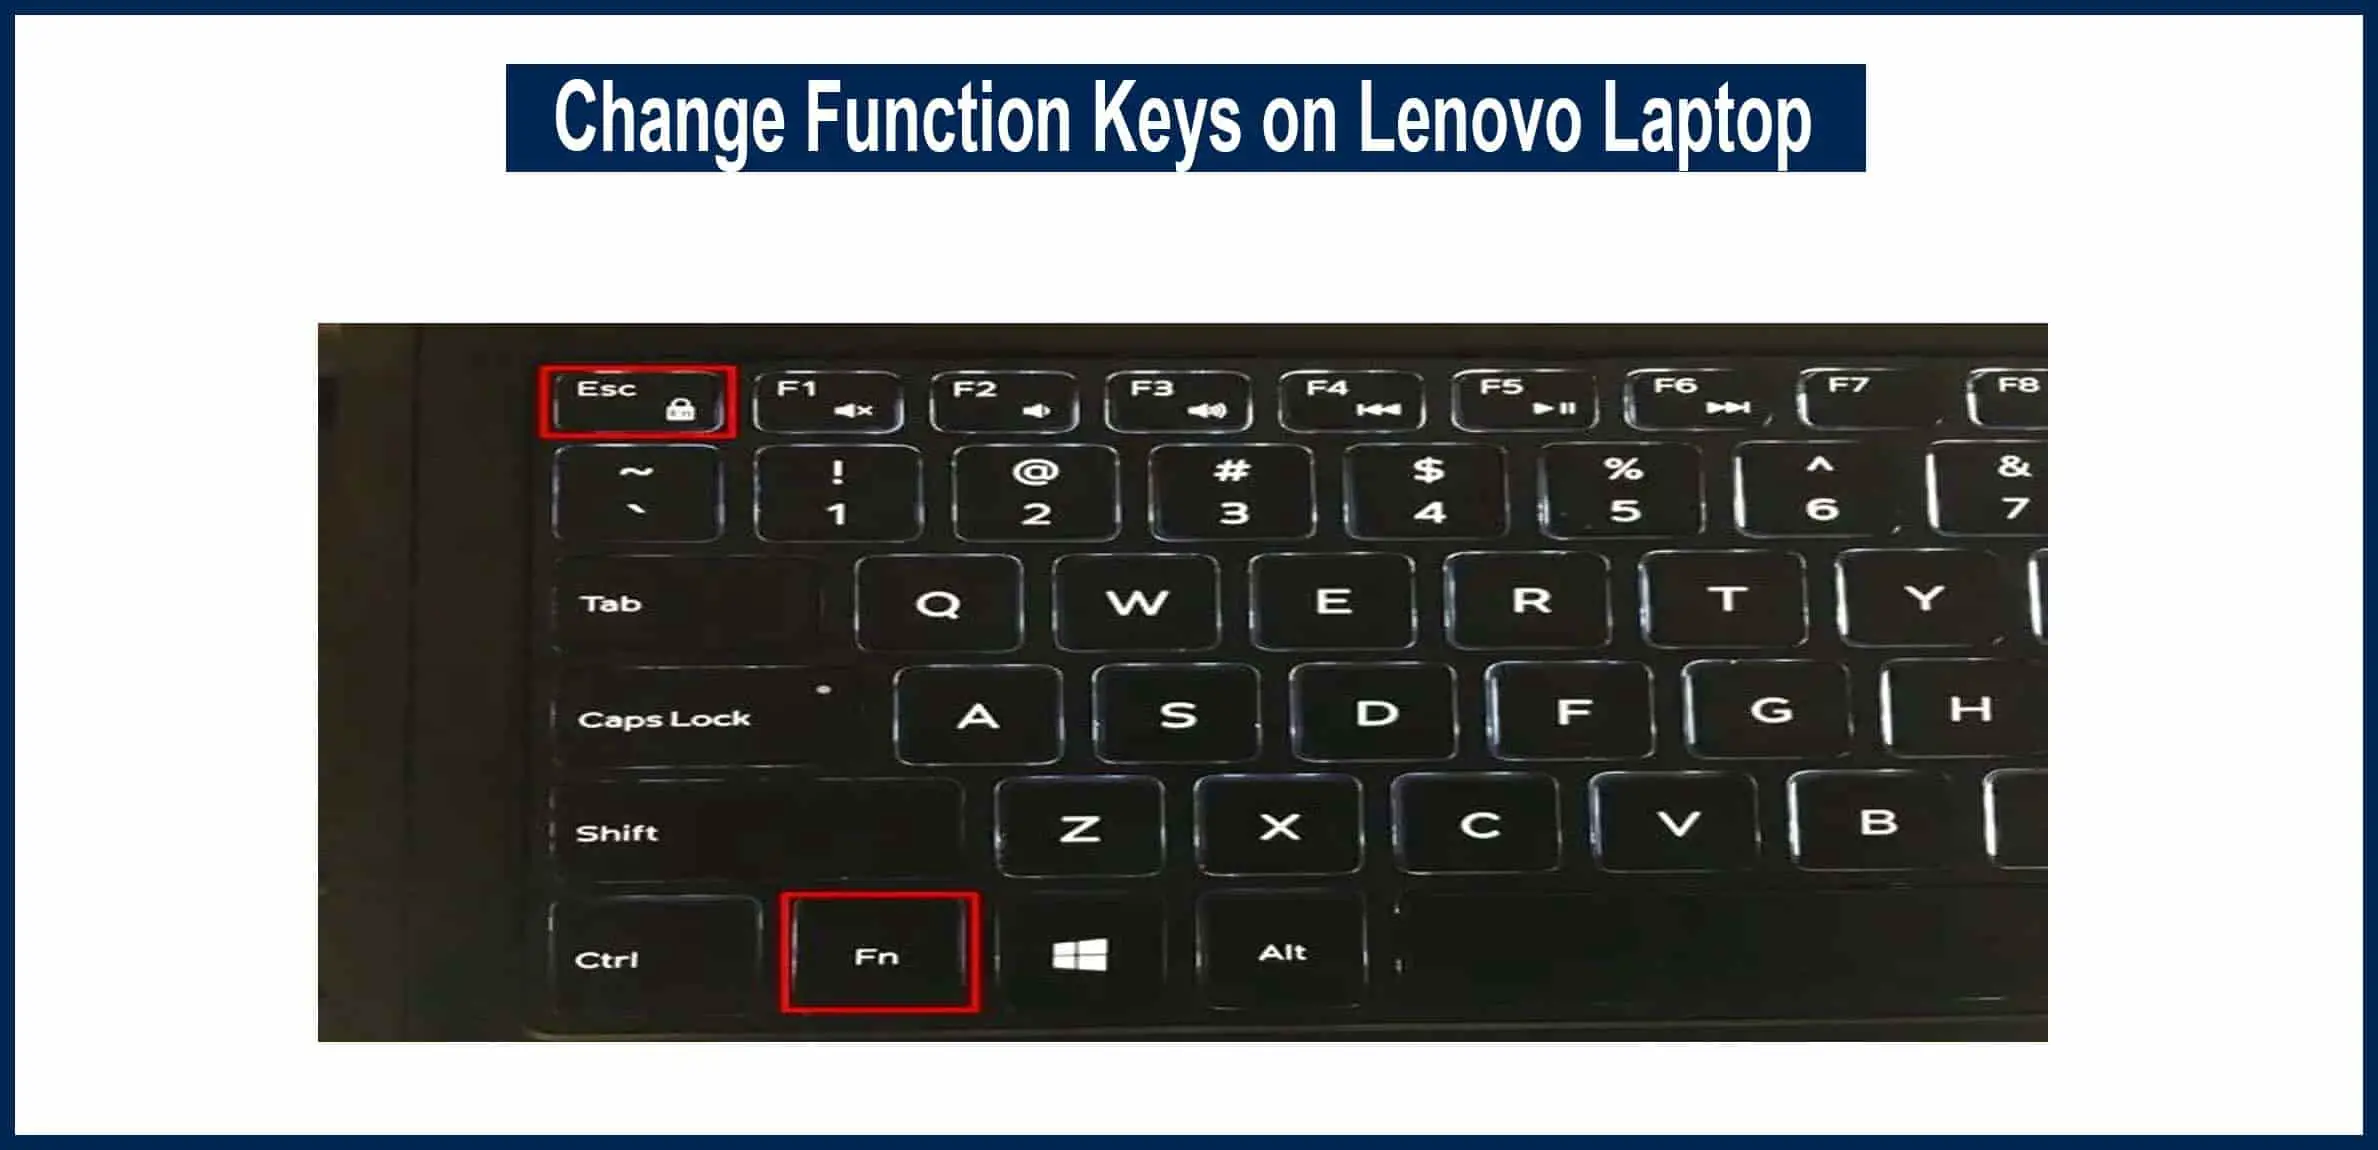 How To Change Function Keys On My Lenovo Laptop